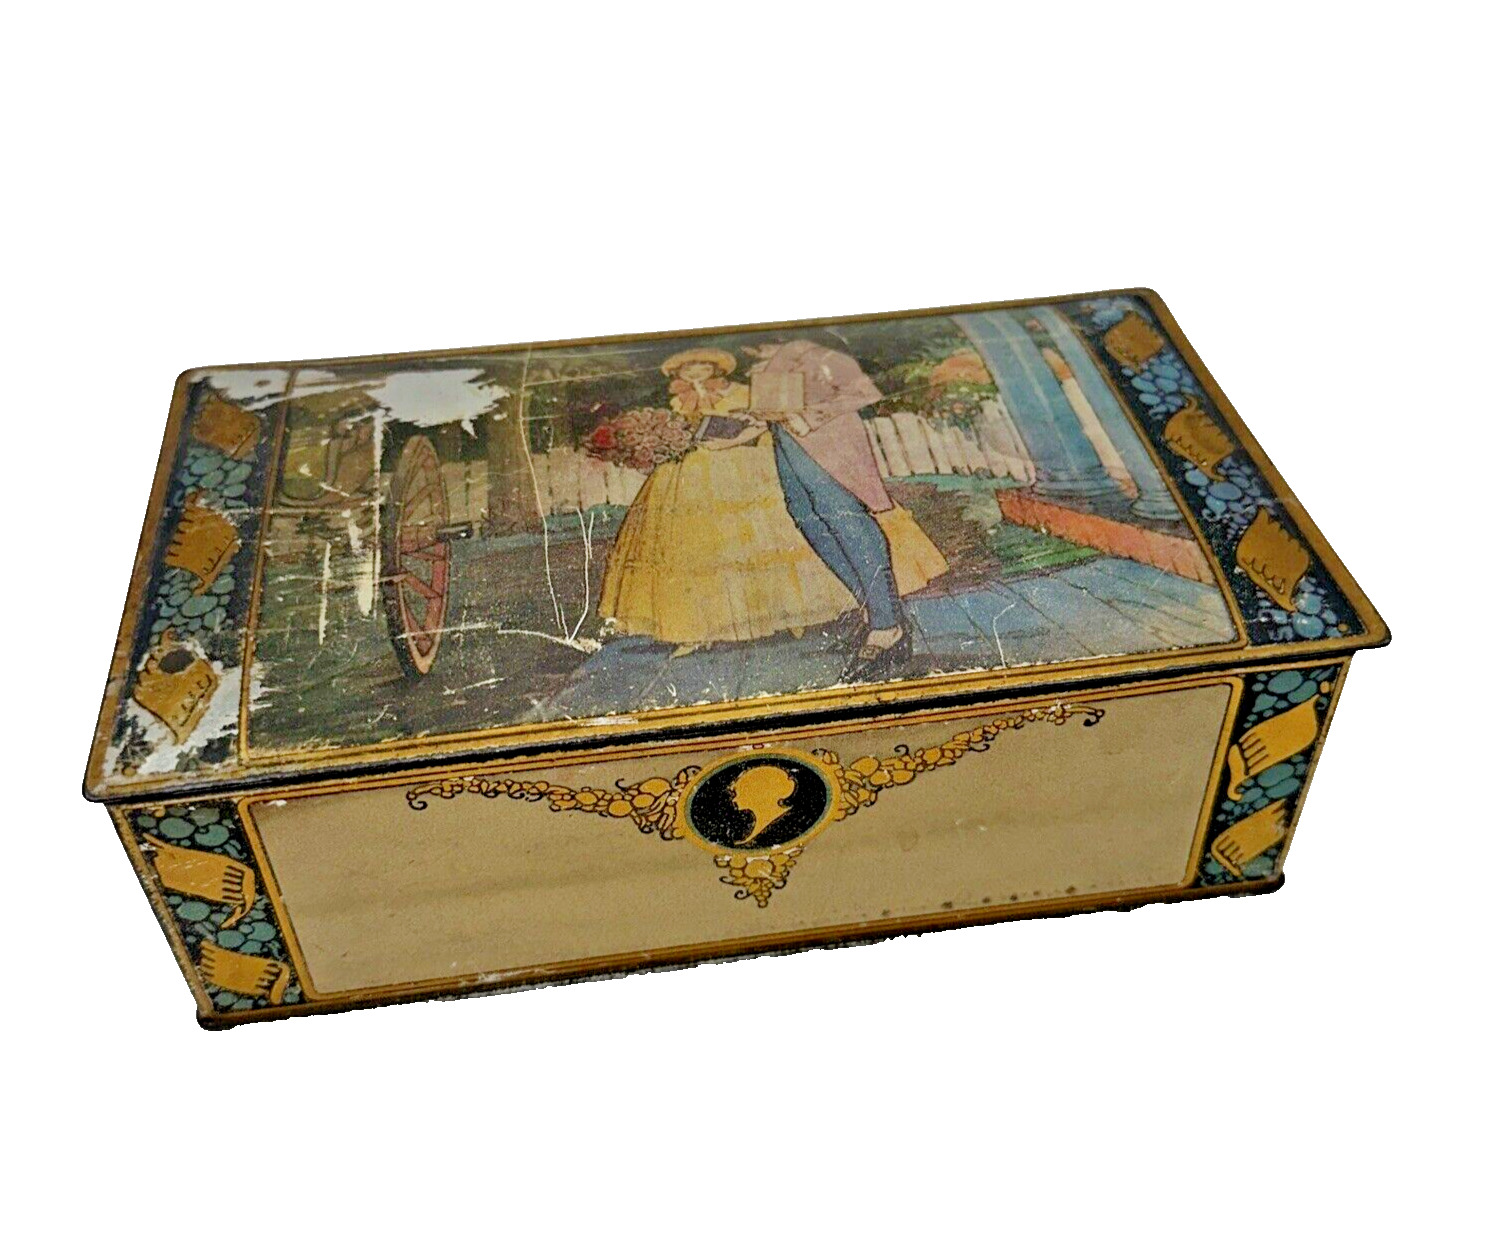 VTG Canco Art Nouveau Hinged Tin Box with Courtship Scene Weathered Estate Piece